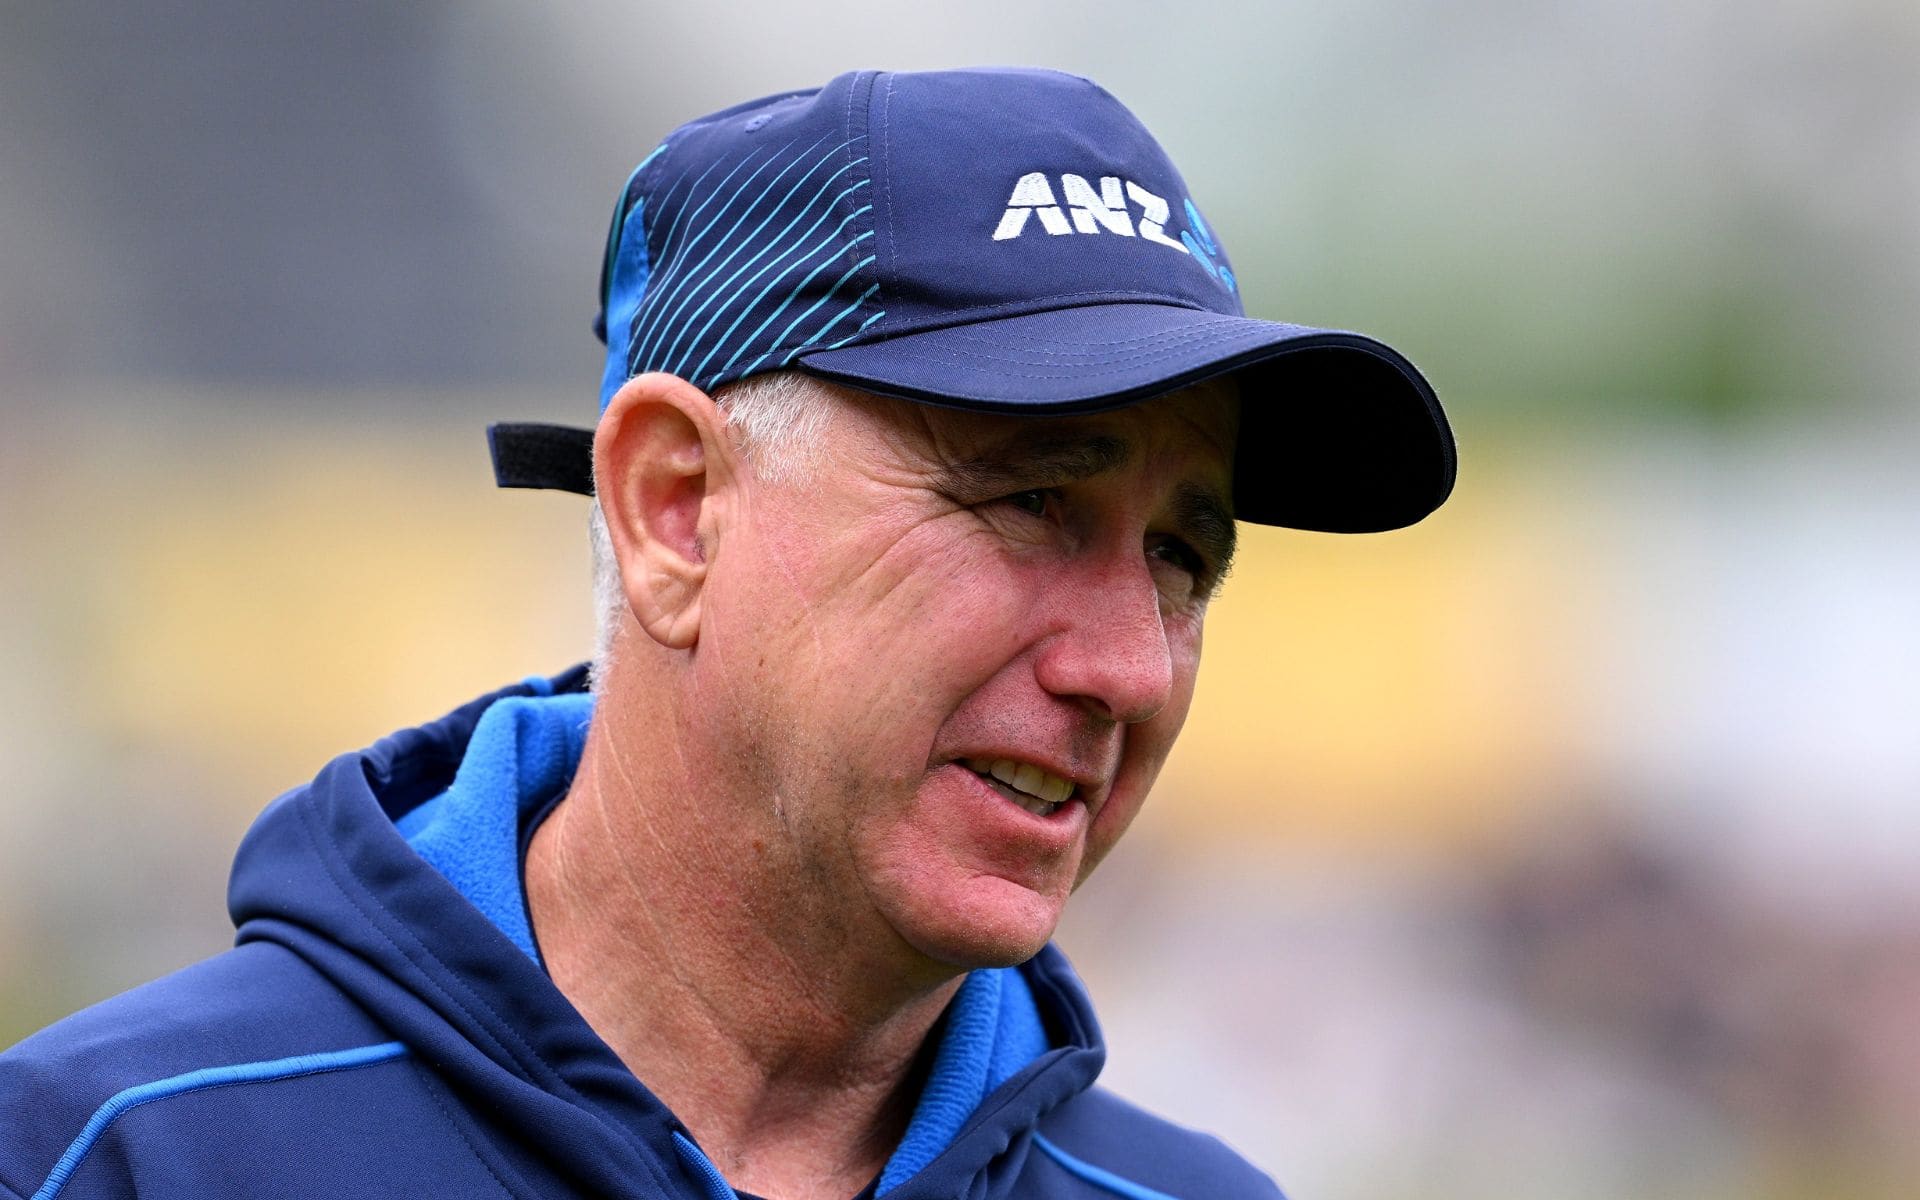 Gary Stead will aim to lead the Kiwis to their first T20 WC title (X.com)